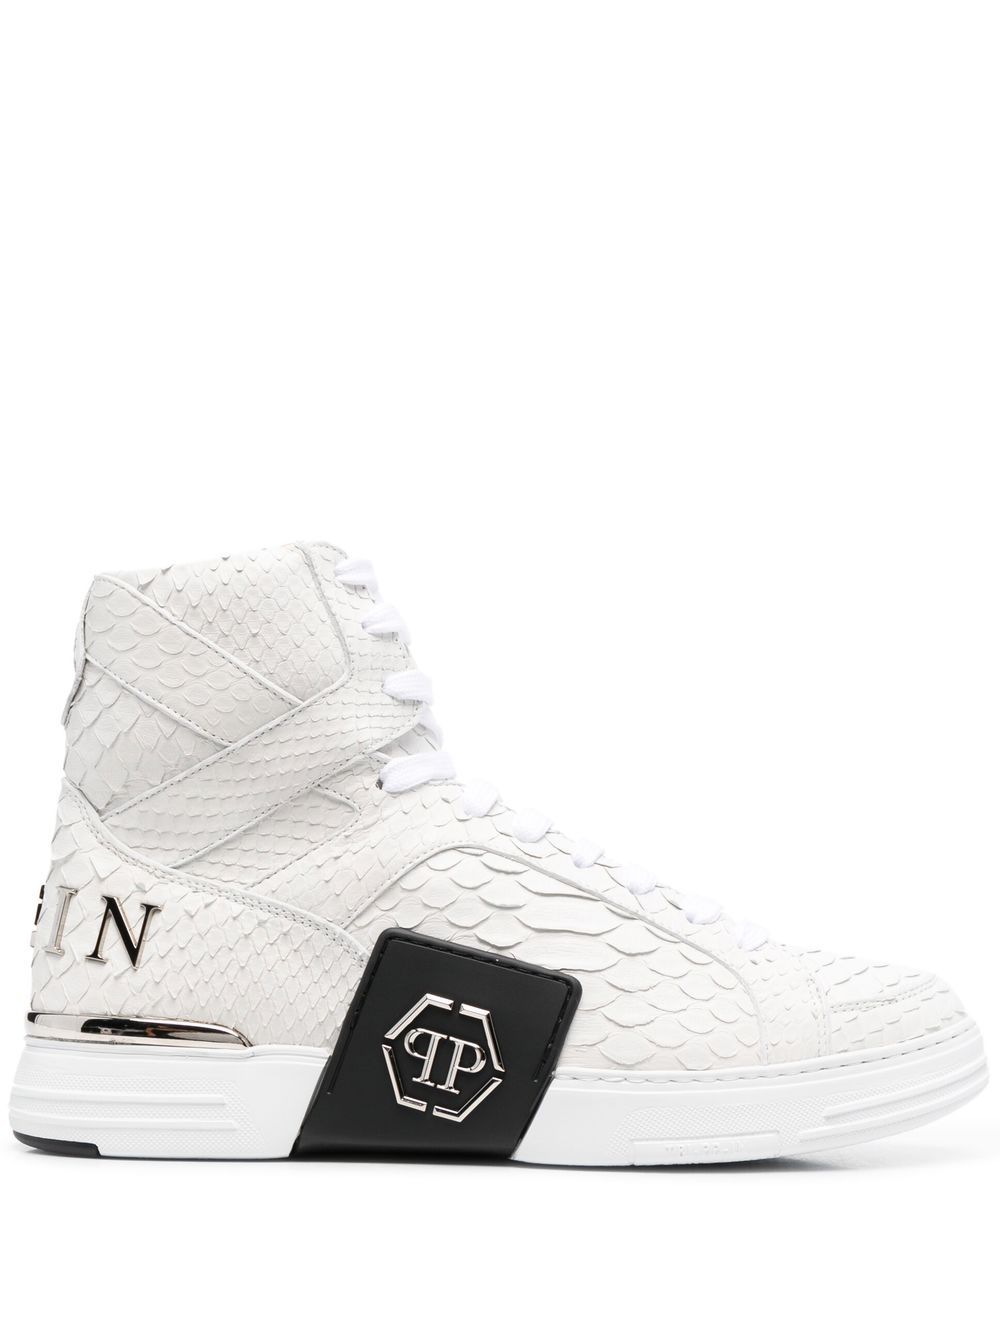 Philipp Plein - snakeskin-effect high-top sneakers - unisex - Calf Leather/Calf Leather/Rubber - 44 - Black